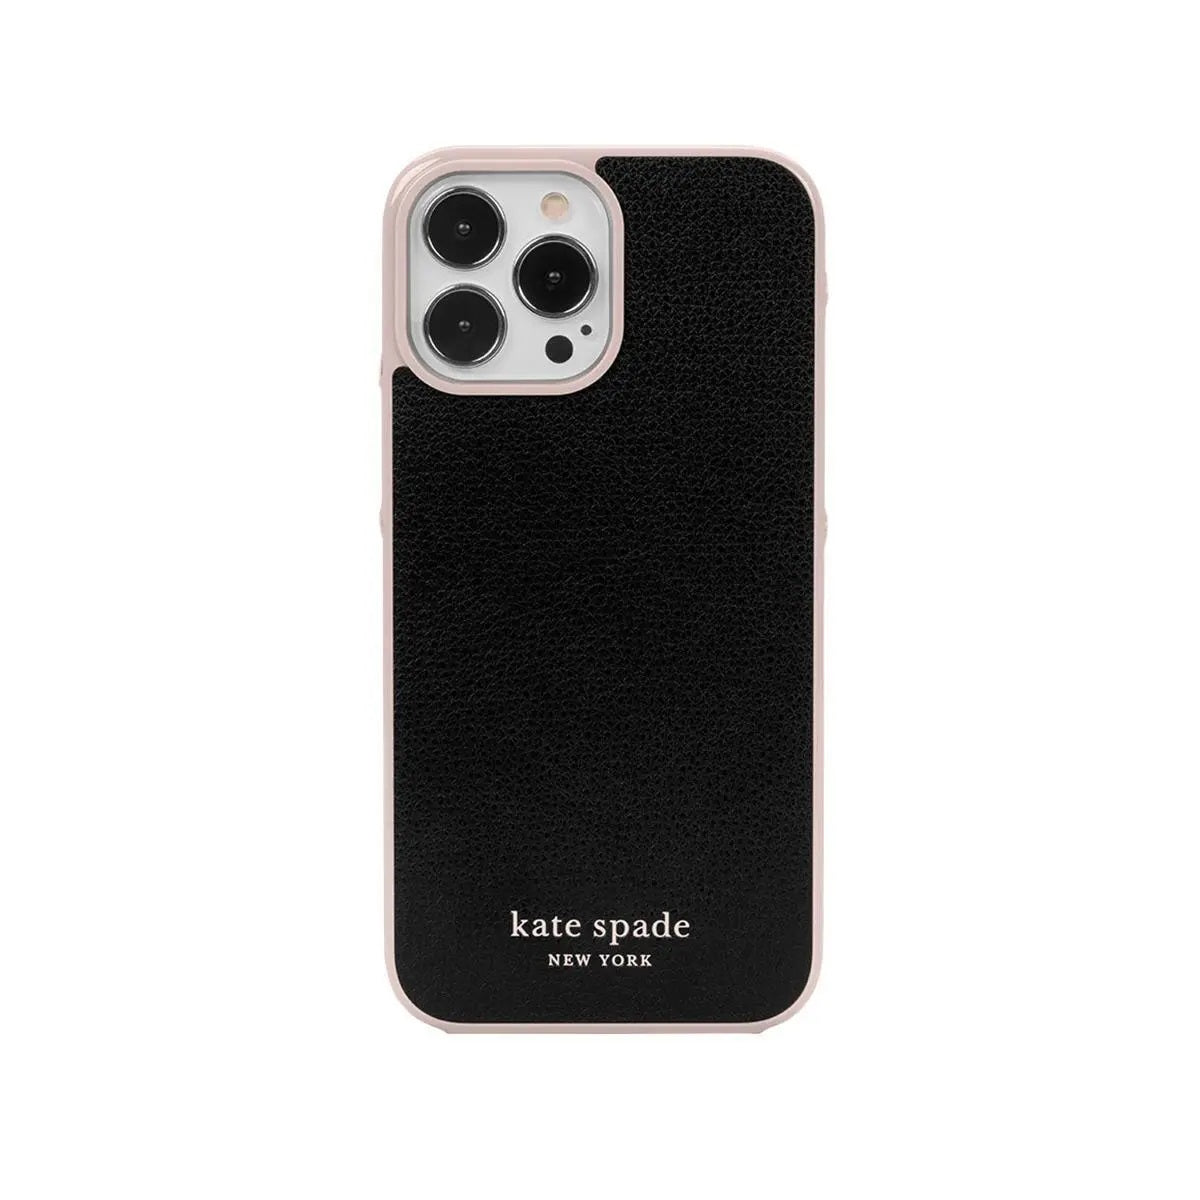 Kate Spade New York Protective Hardshell Case for iPhone 12 Pro Max/ 13 Pro Max (Light Fawn Black)